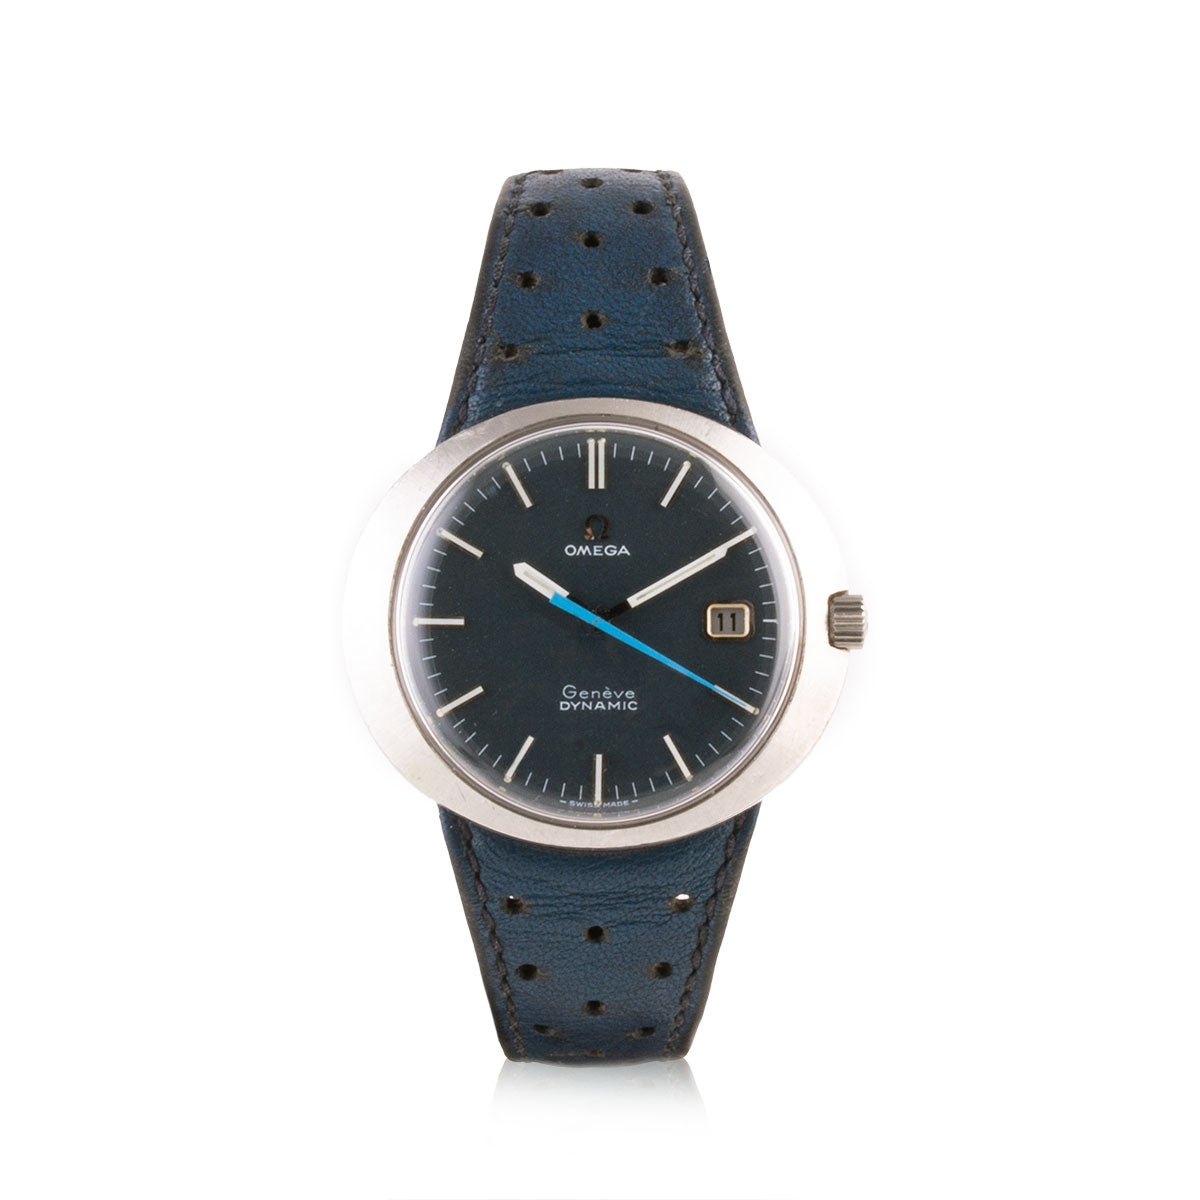 Second-hand watch - Omega - Dynamic - 1800€